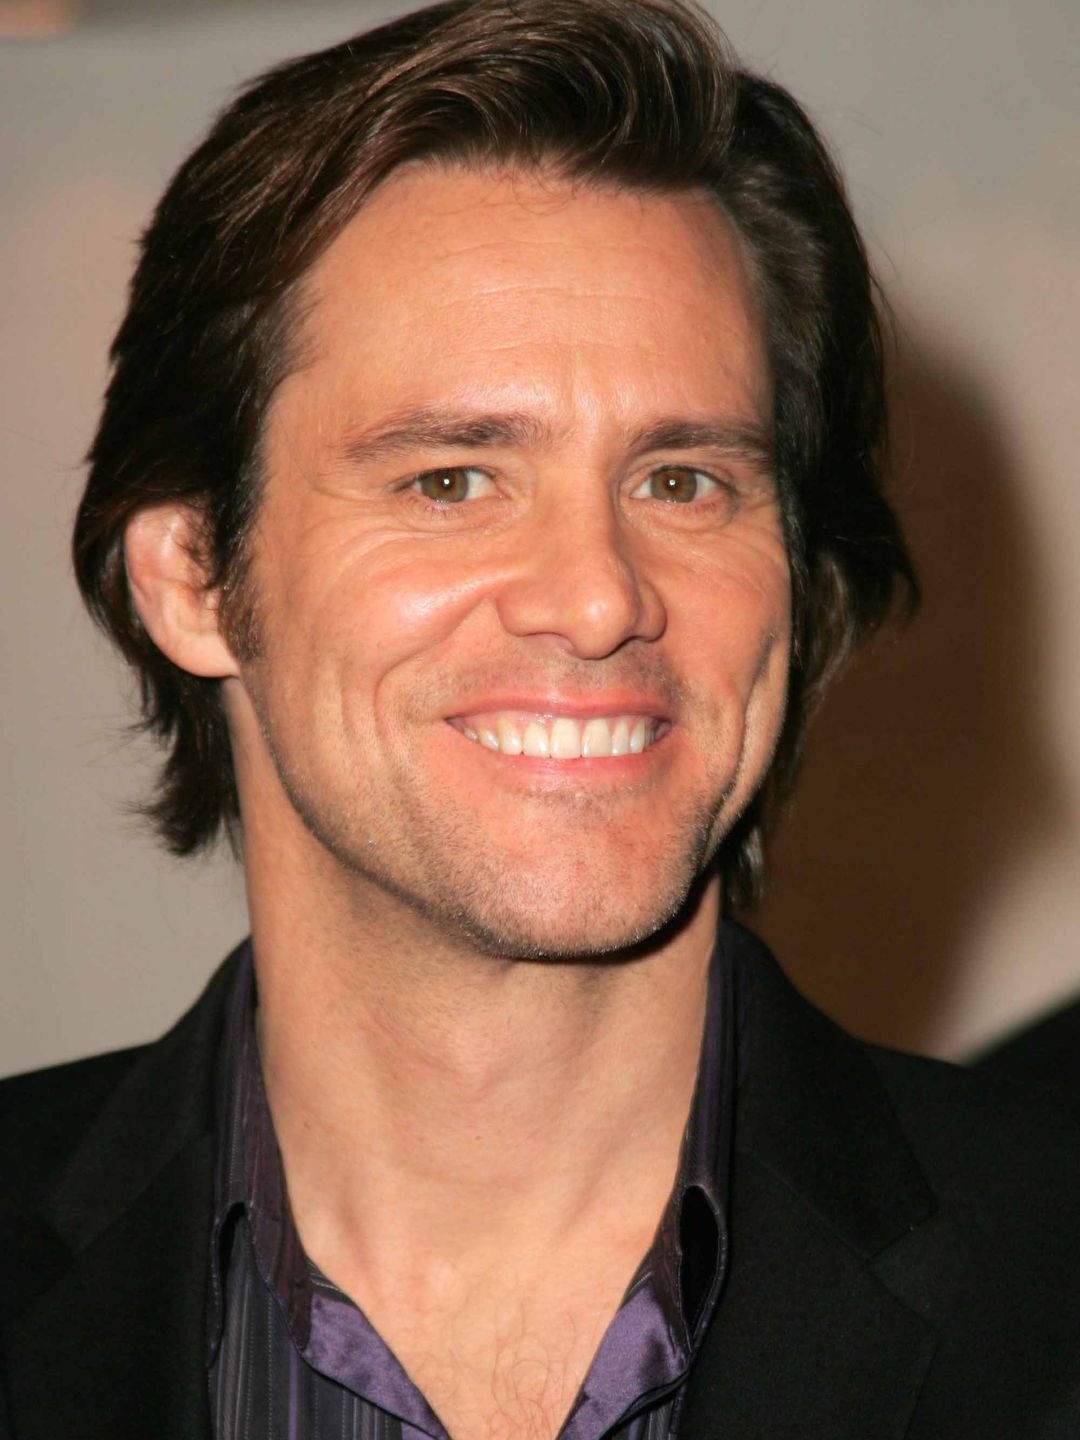 Jim Carrey who is his mother